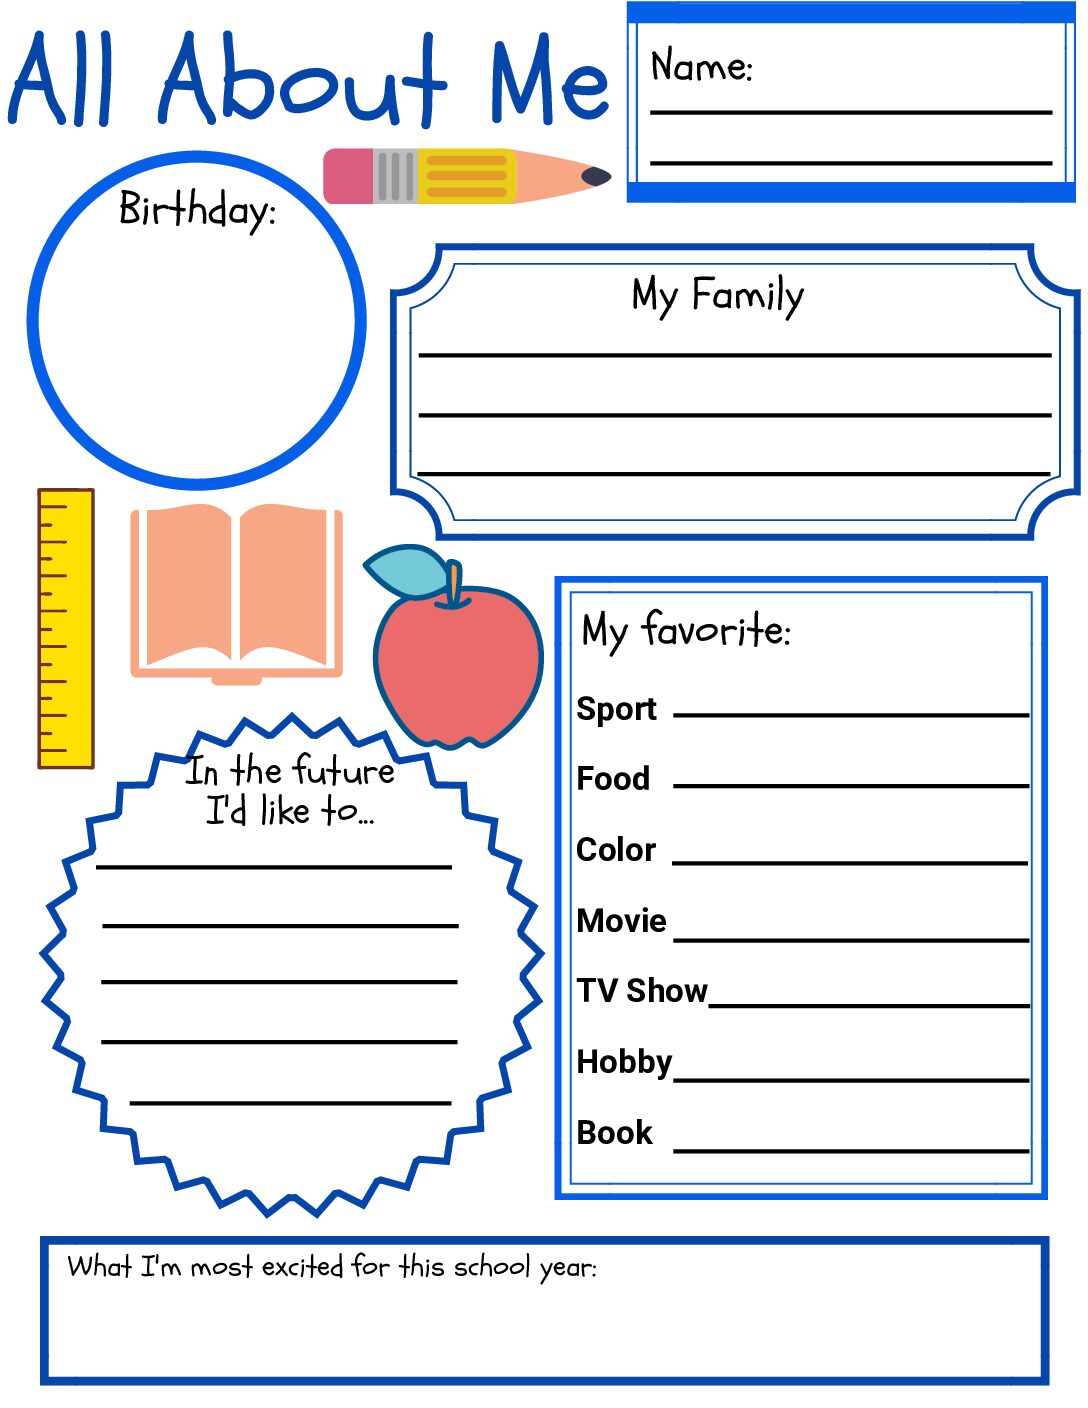 English EFL Worksheet - All About Me - Language Advisor Throughout All About Me Printable Worksheet